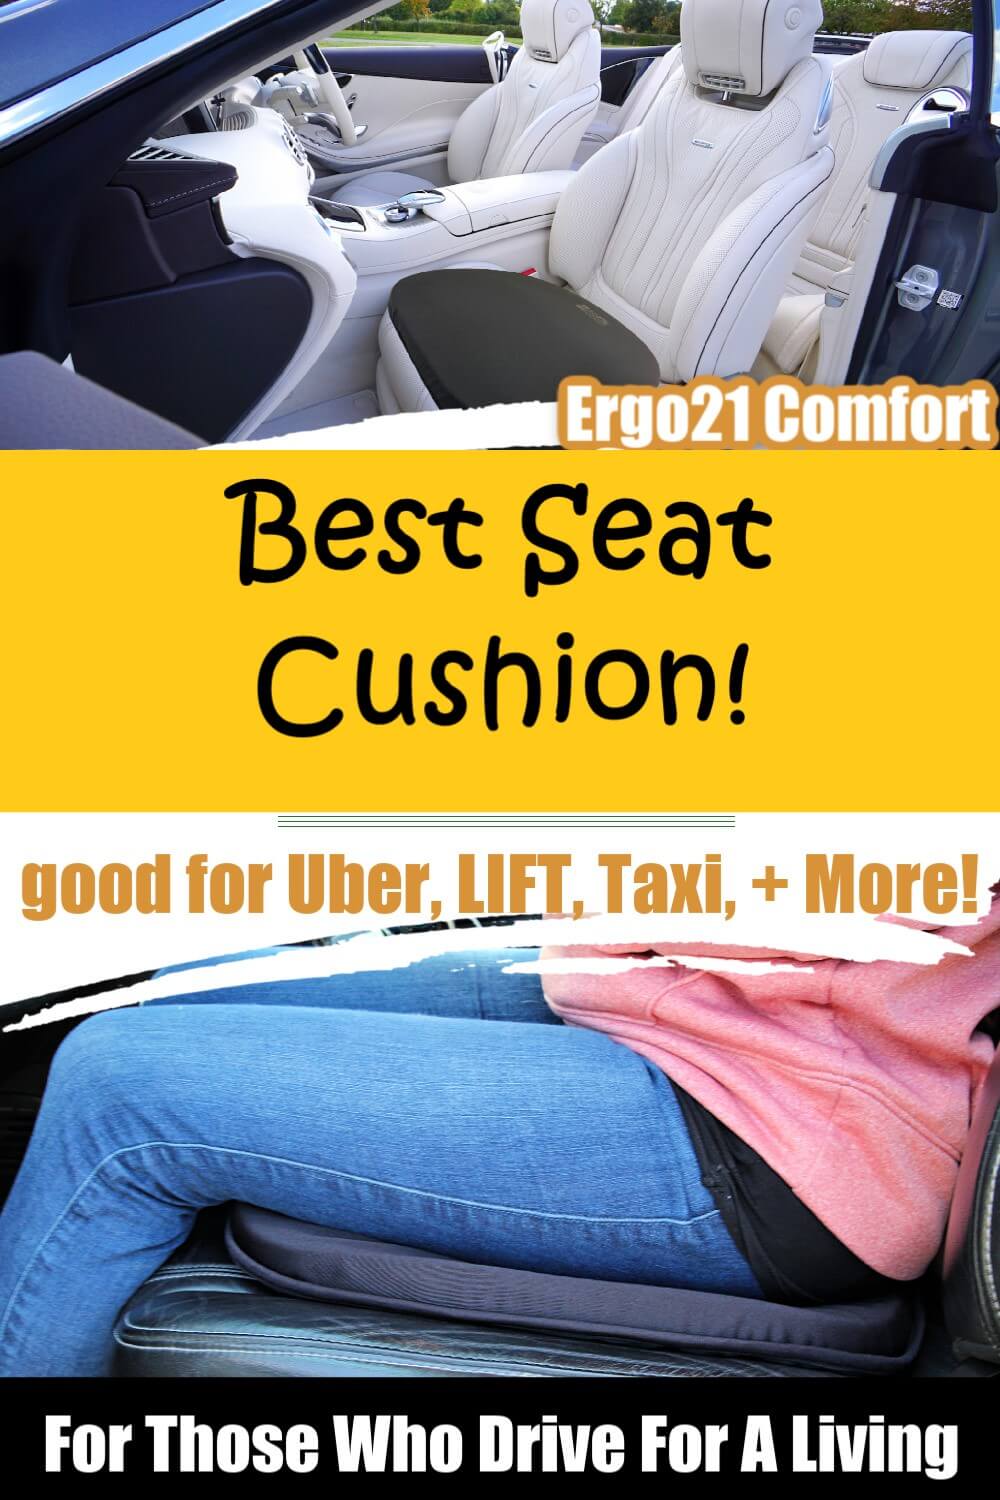 https://www.ergo21.com/wp-content/uploads/2022/08/2_Which_cushion_is_good_for_-Mercedes.jpg